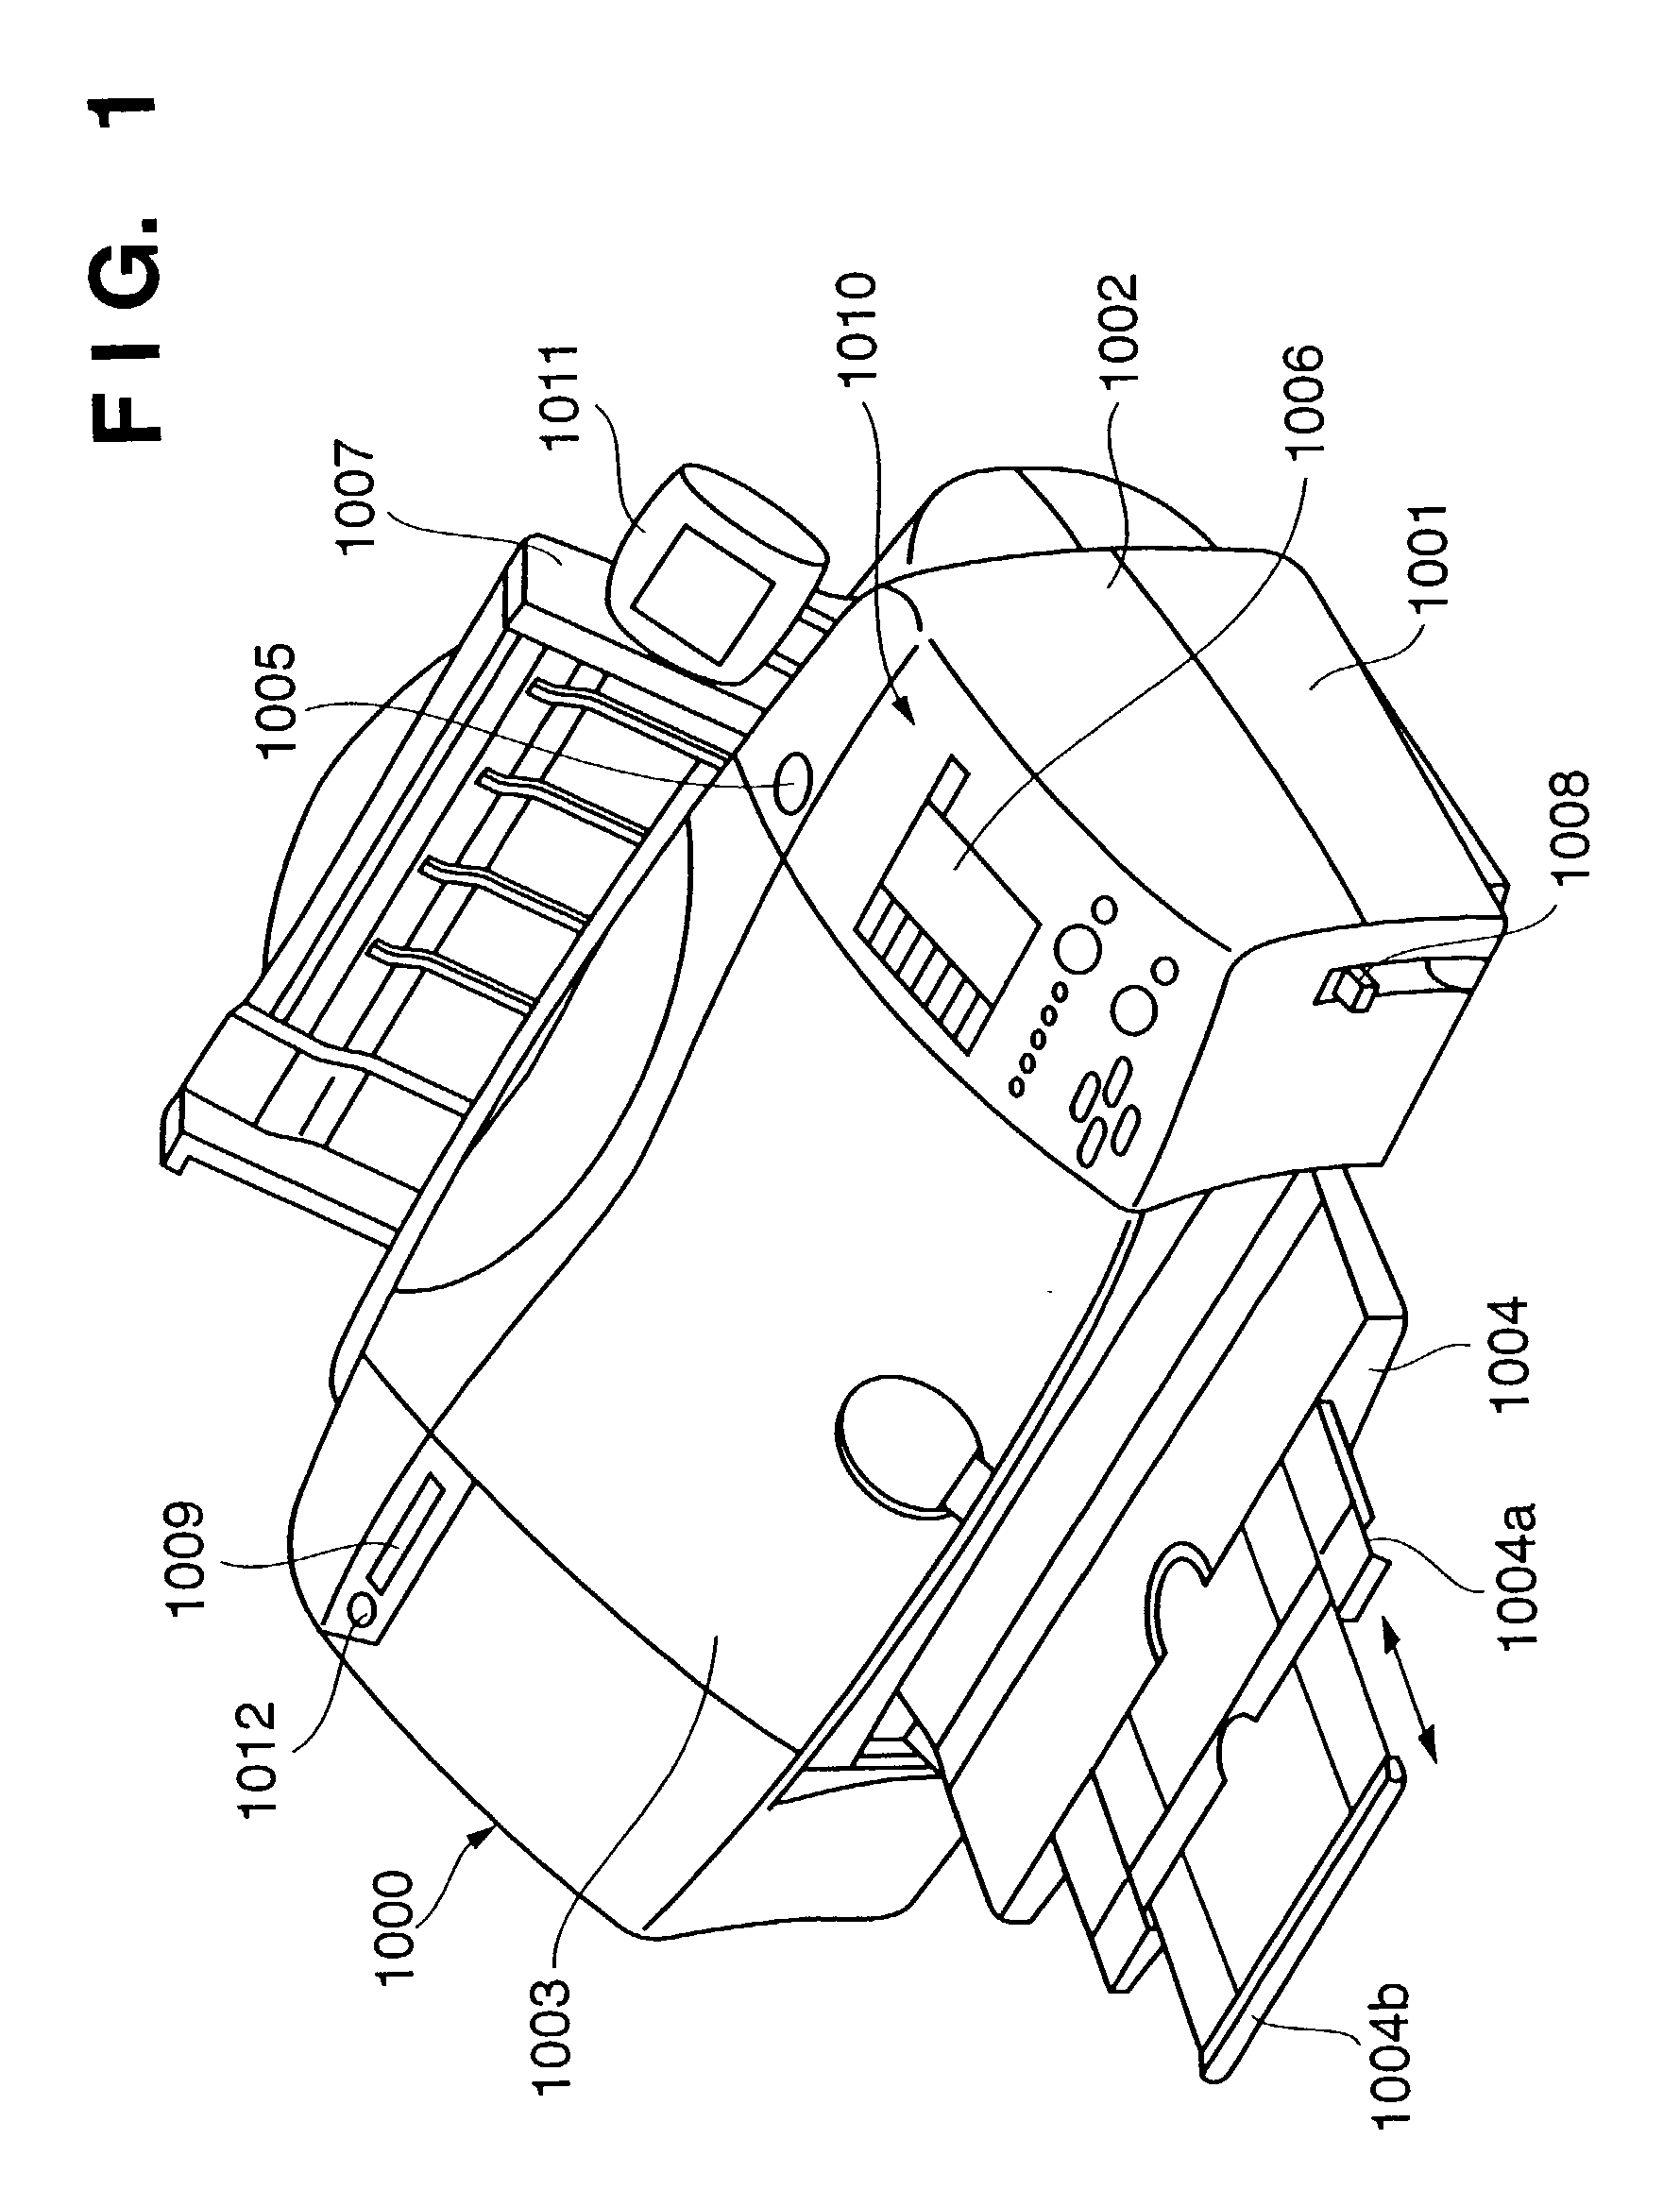 Imaging apparatus, system having imaging apparatus and printing apparatus, and control method therefor